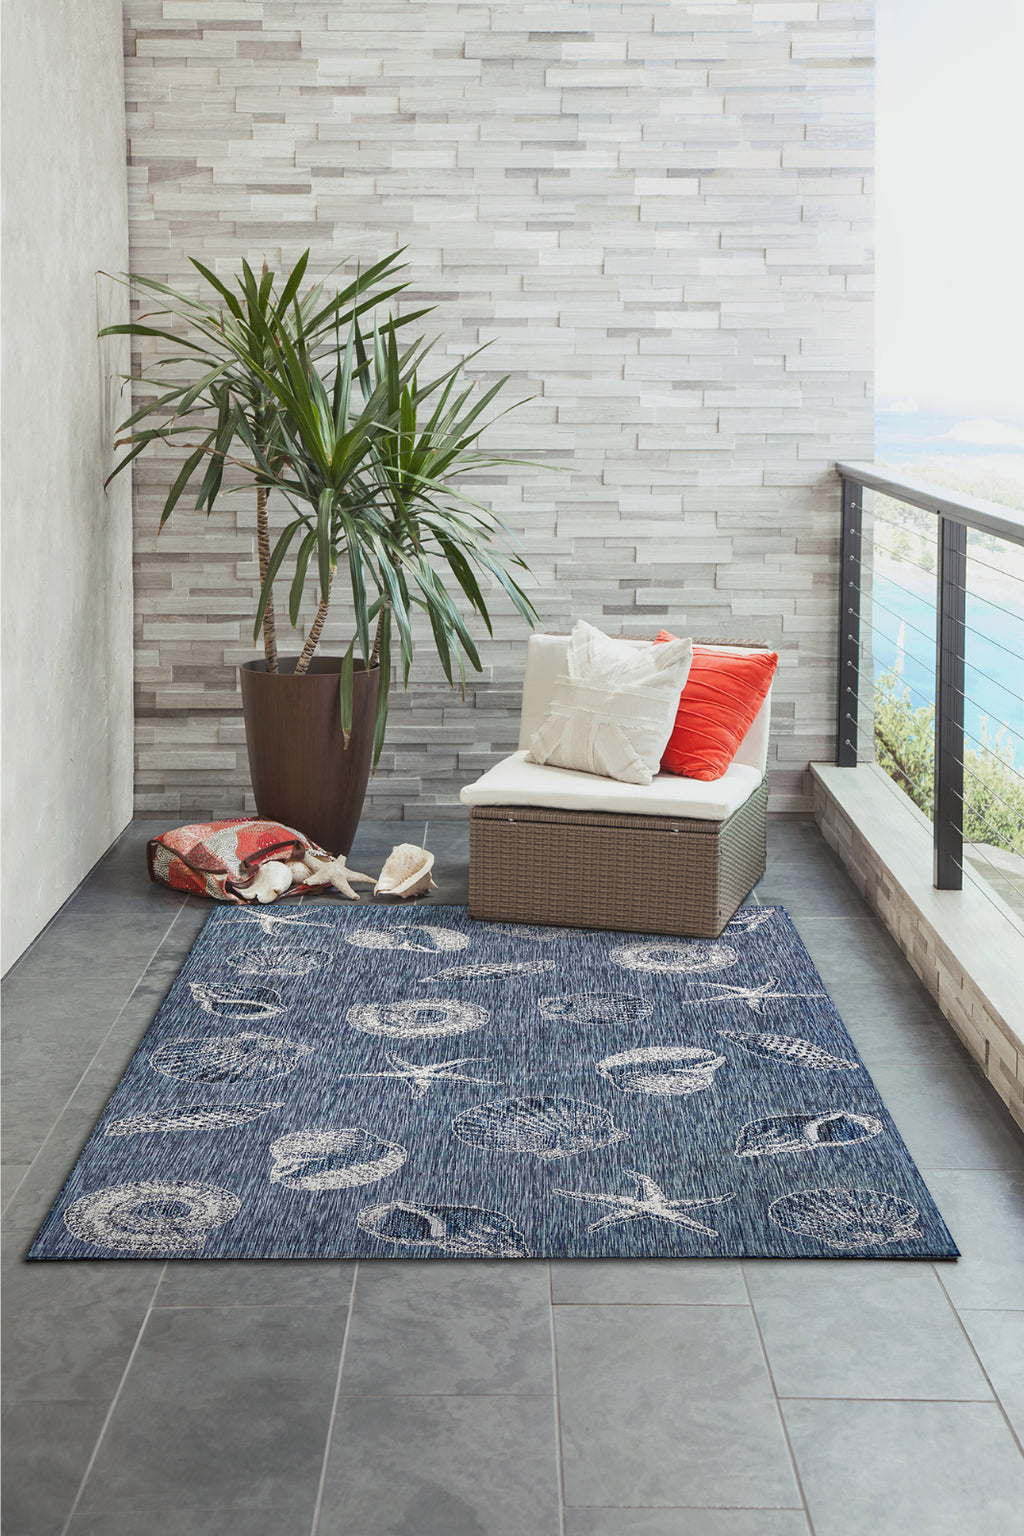 Trans Ocean Carmel 8414/33 Shells Navy Area Rug by Liora Manne Room Scene Image Feature